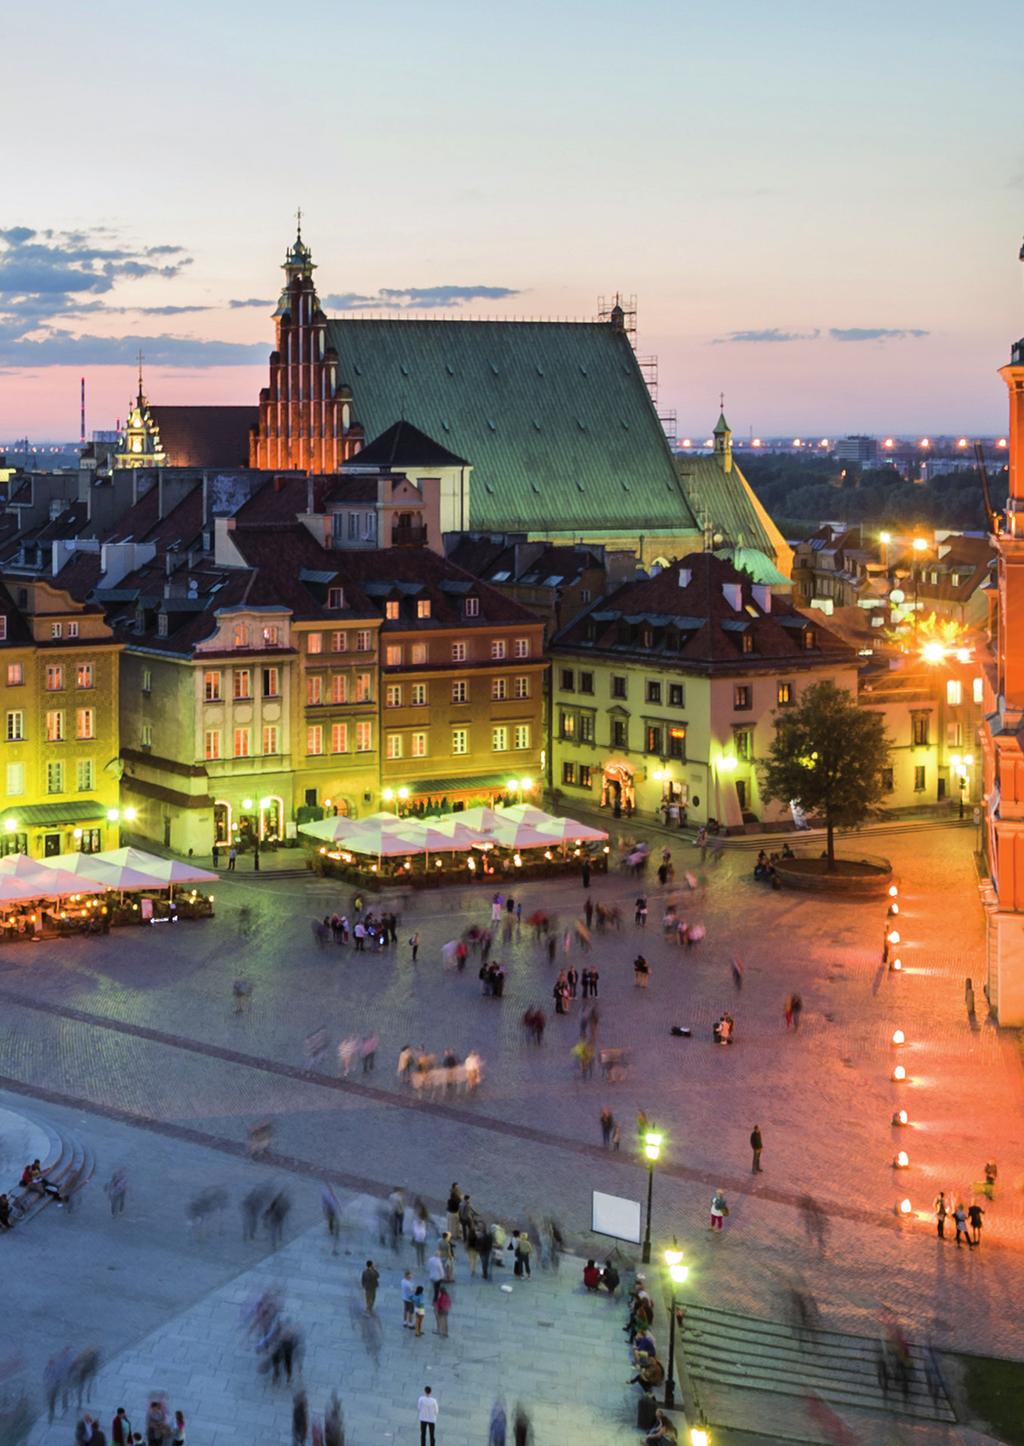 Garrigues in Poland We assist companies seeking to set up, expand and consolidate their operations in Poland.